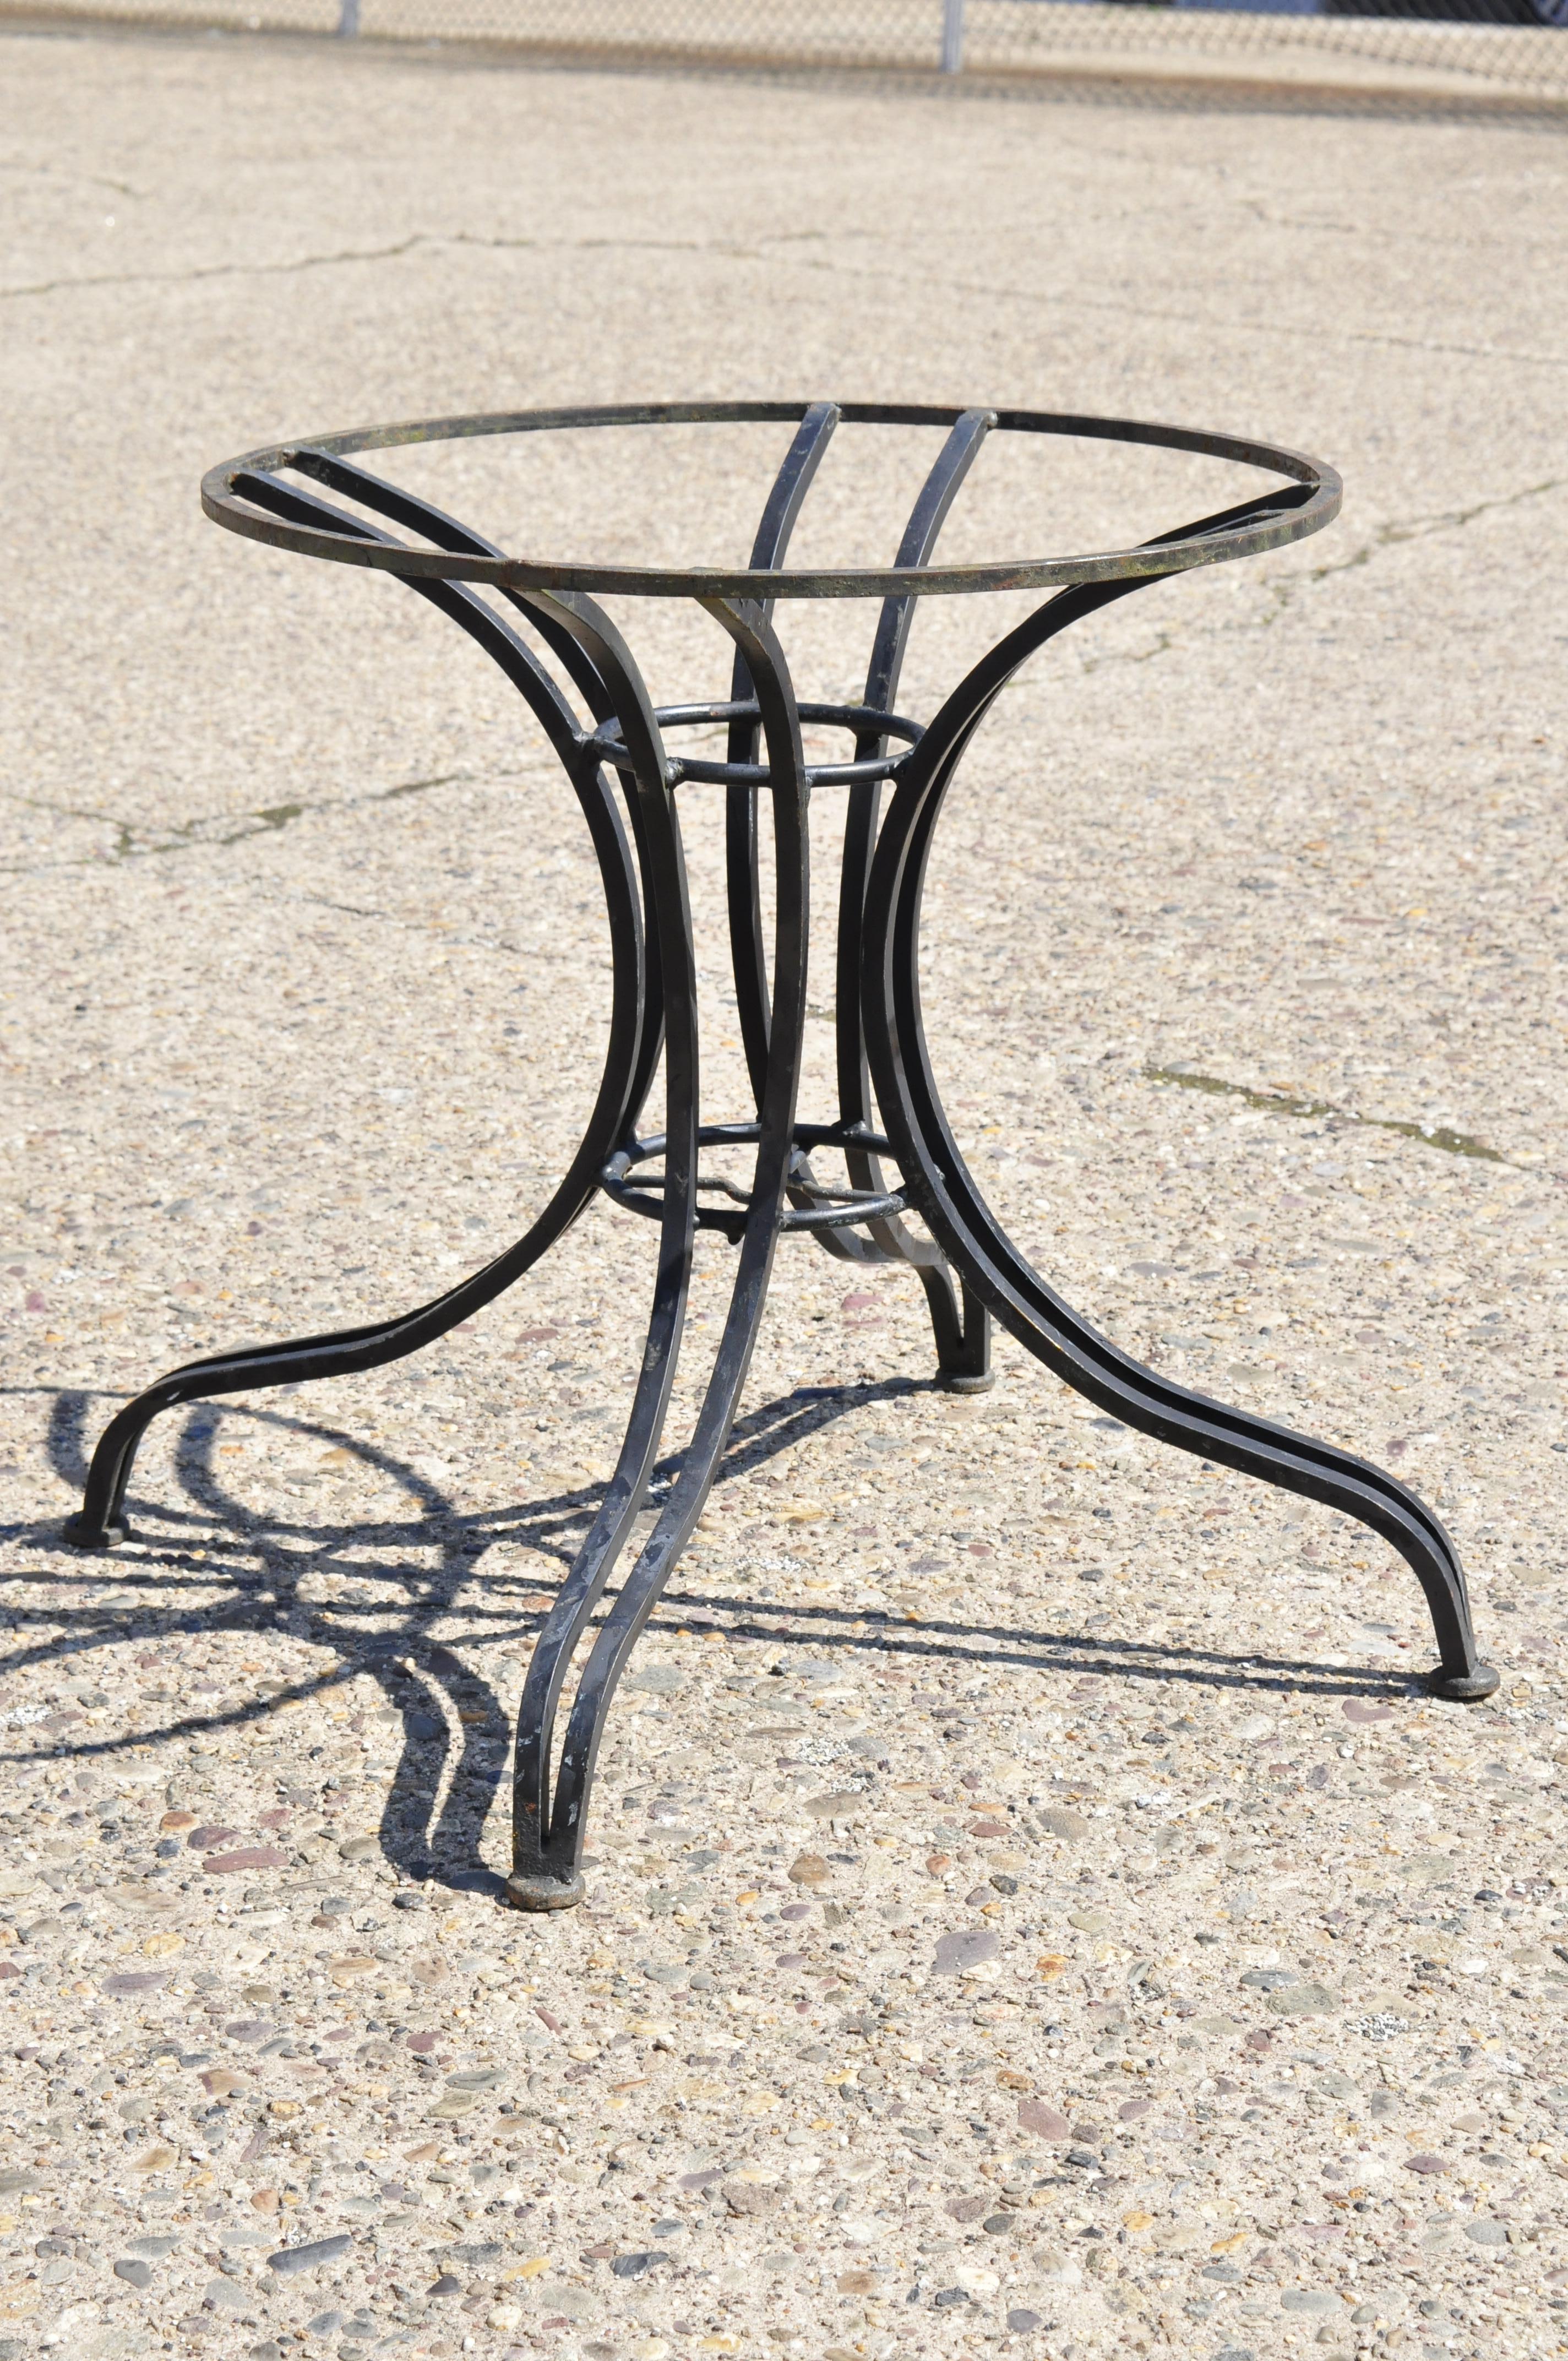 Vintage heavy wrought iron garden patio dining table pedestal base after Salterini. Item features wrought iron construction, clean modernist line, sleek sculptural form. Mid-20th century. Measurements: 28